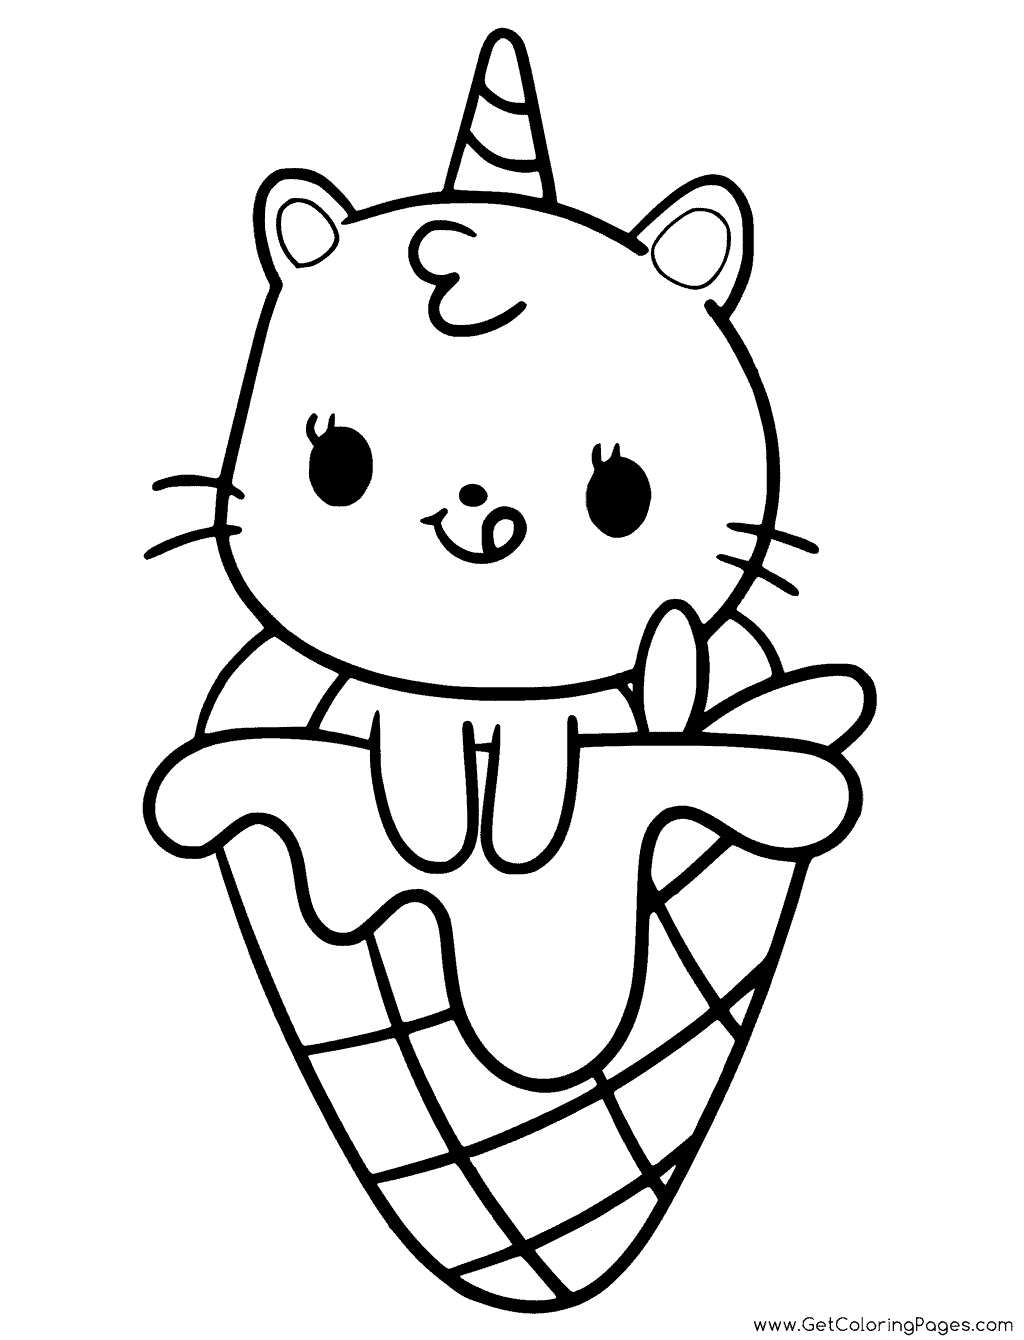 21 Cutest Unicorn Cat Coloring Pages Free   Artsy Pretty Plants